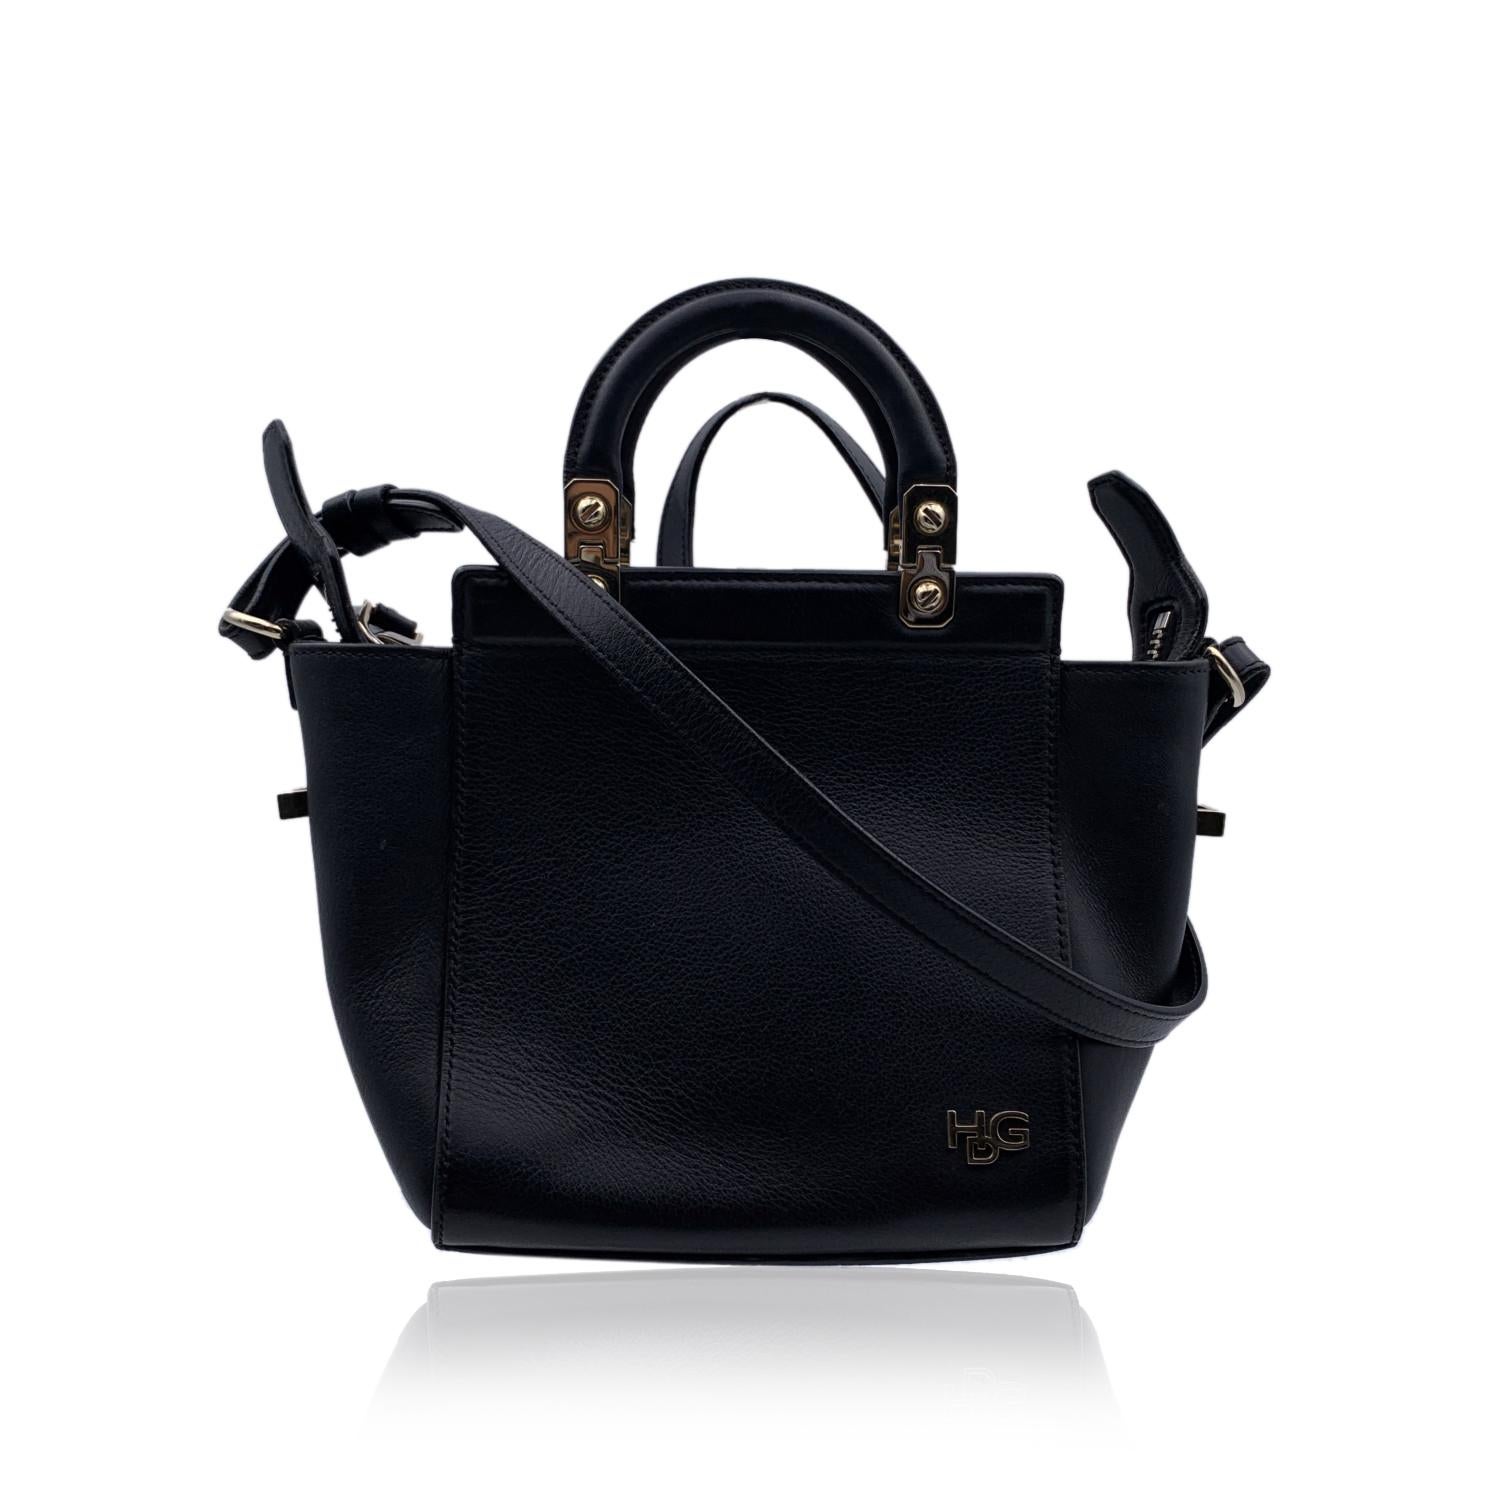 Givenchy 'HDG Small Tote' bag with shoulder strap. Black leather and light gold metal hardware. Double top handles and removable shoulder strap. Upper zipper closure. Black microfiber lining. 'Givenchy - Made in Italy' tag